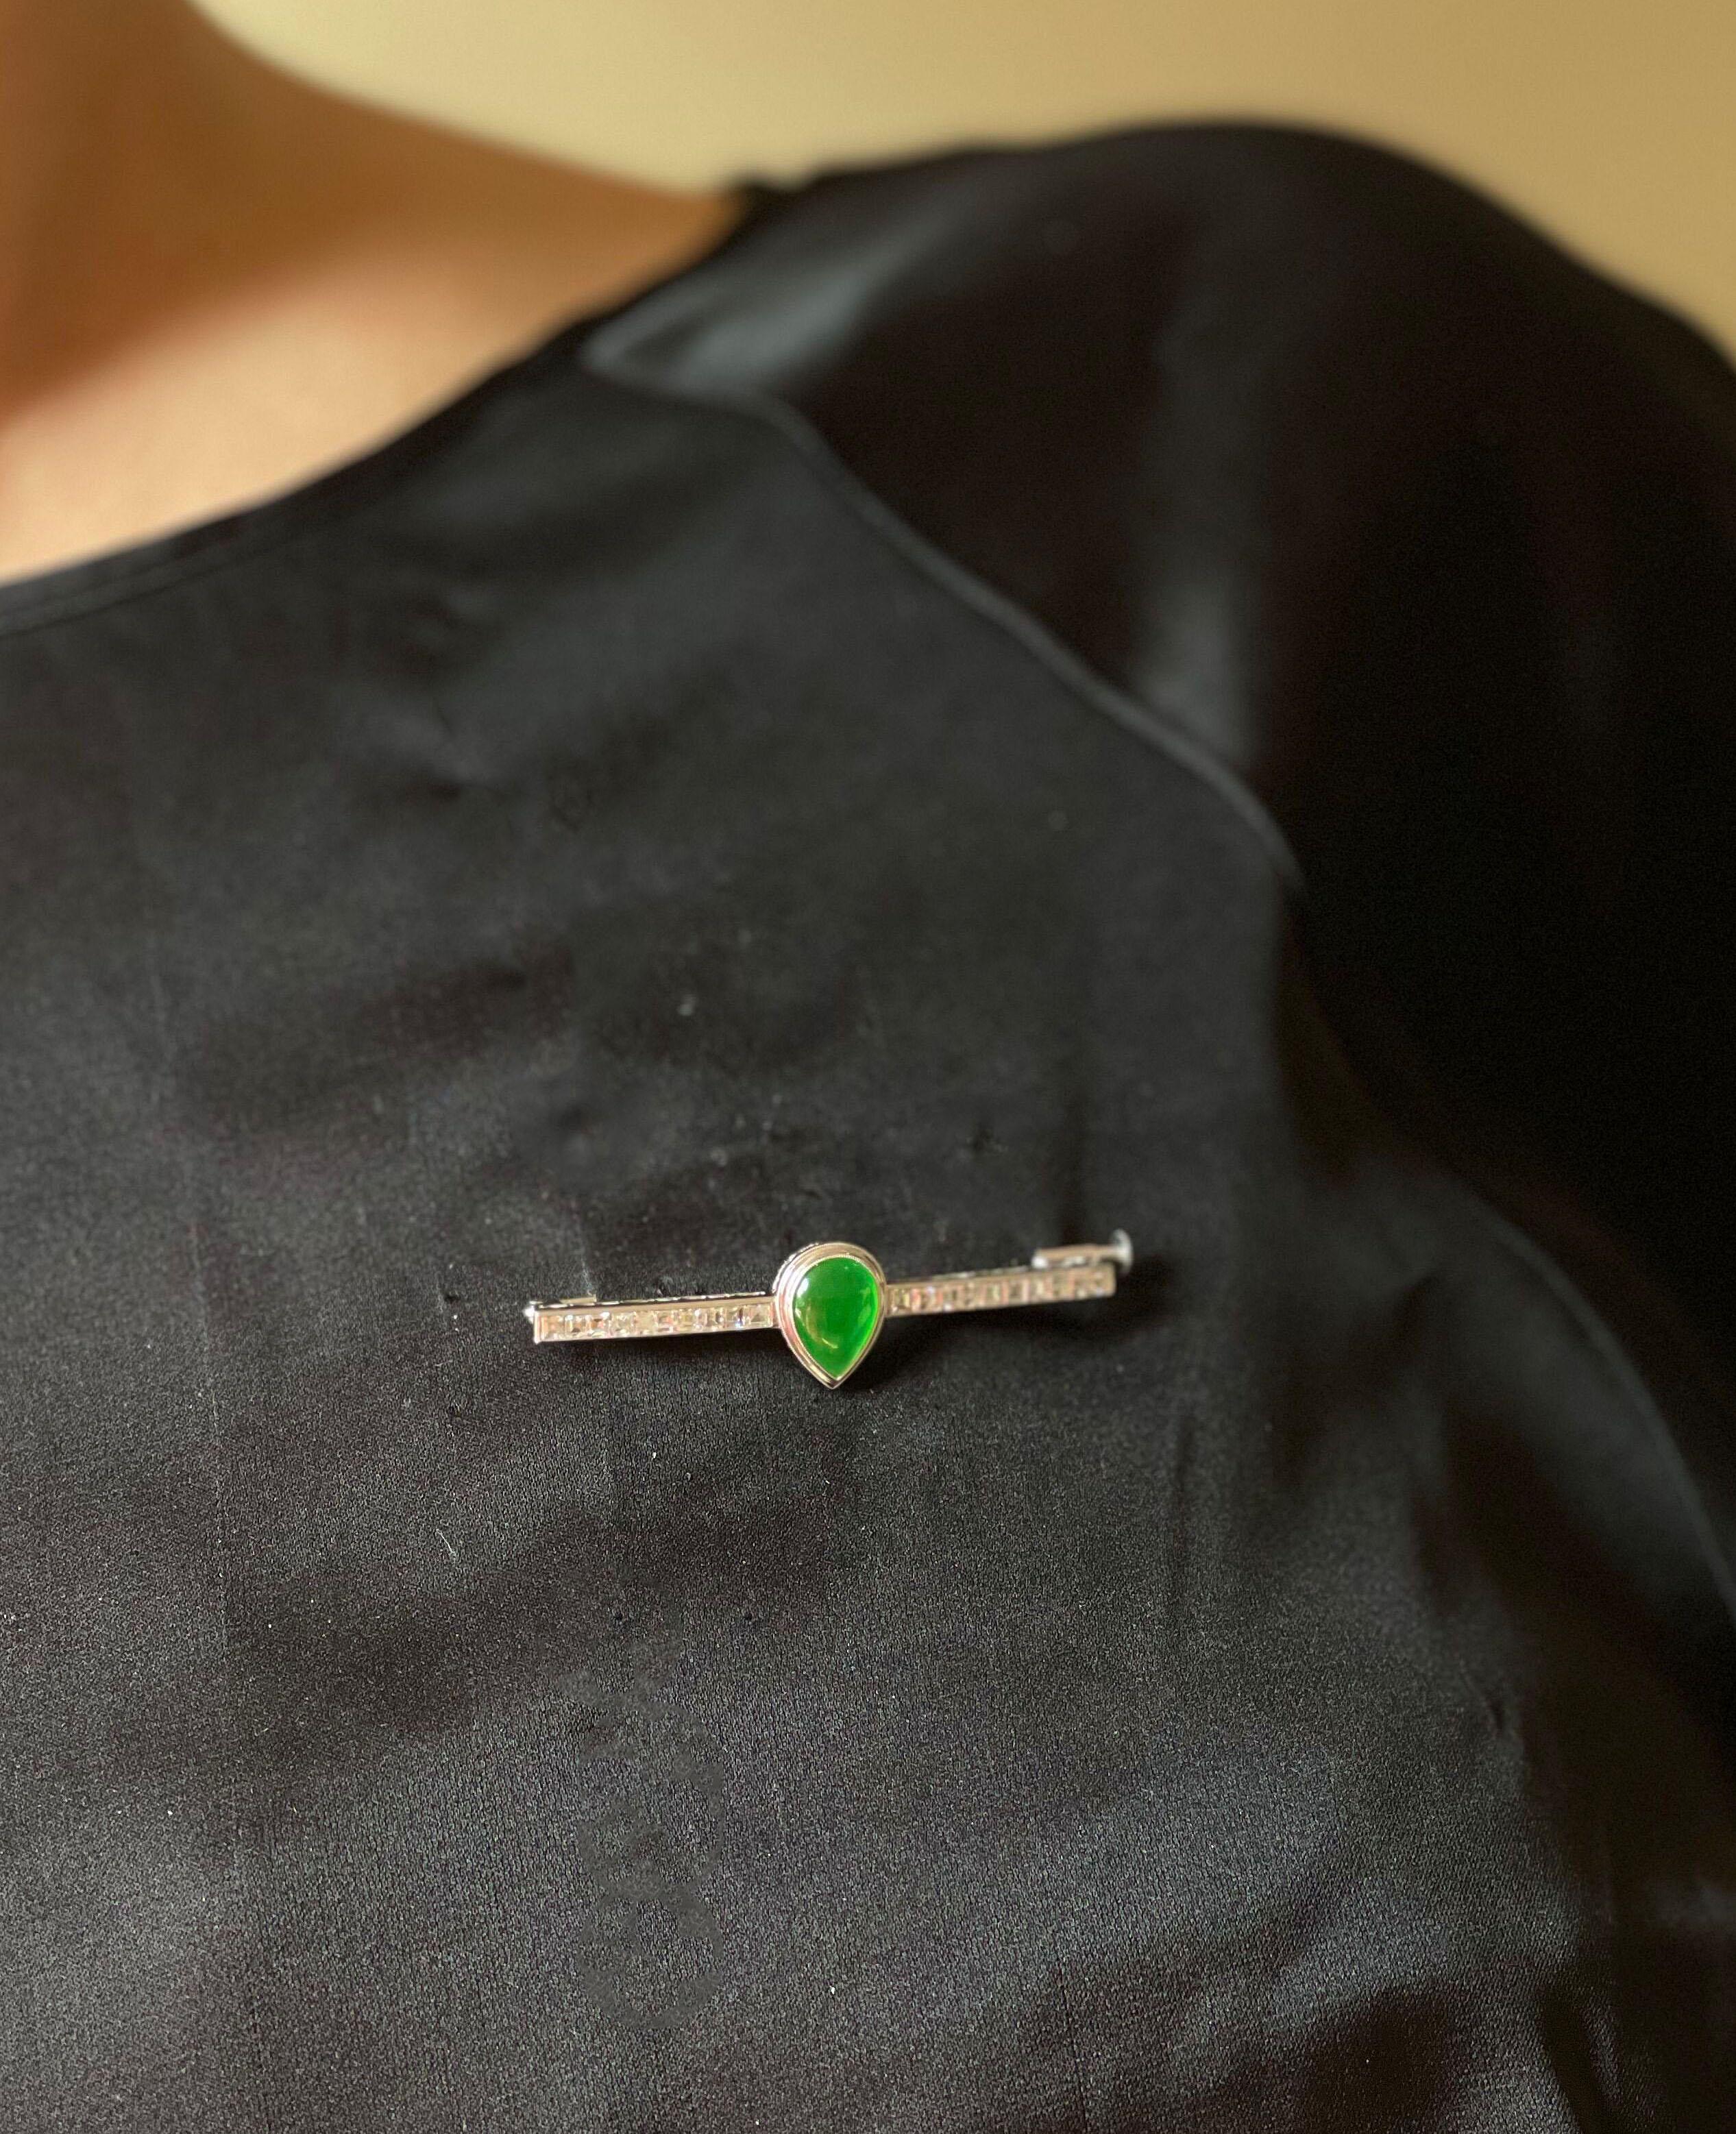 Art Deco platinum bar brooch, with center pear shaped natural jadeite jade cabochon, stone measures 10.8 x 7.85 x 3.7mm. Surrounded with approx. 1.50ctw GH/VS diamonds. Brooch measures 2 1/8